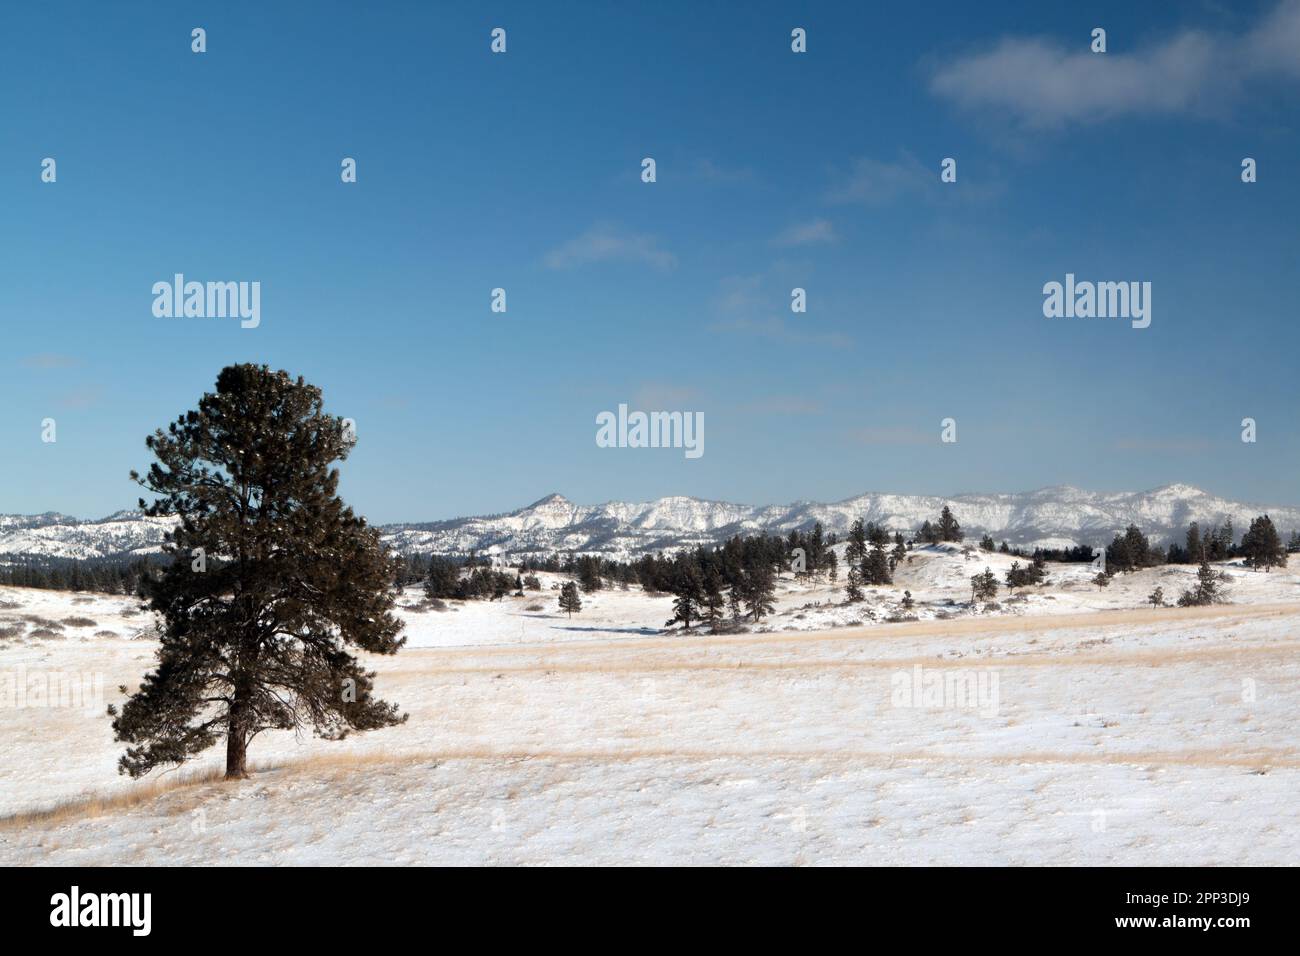 Snowy prairie, pine trees and distant hills in southeastern Montana with room for text Stock Photo